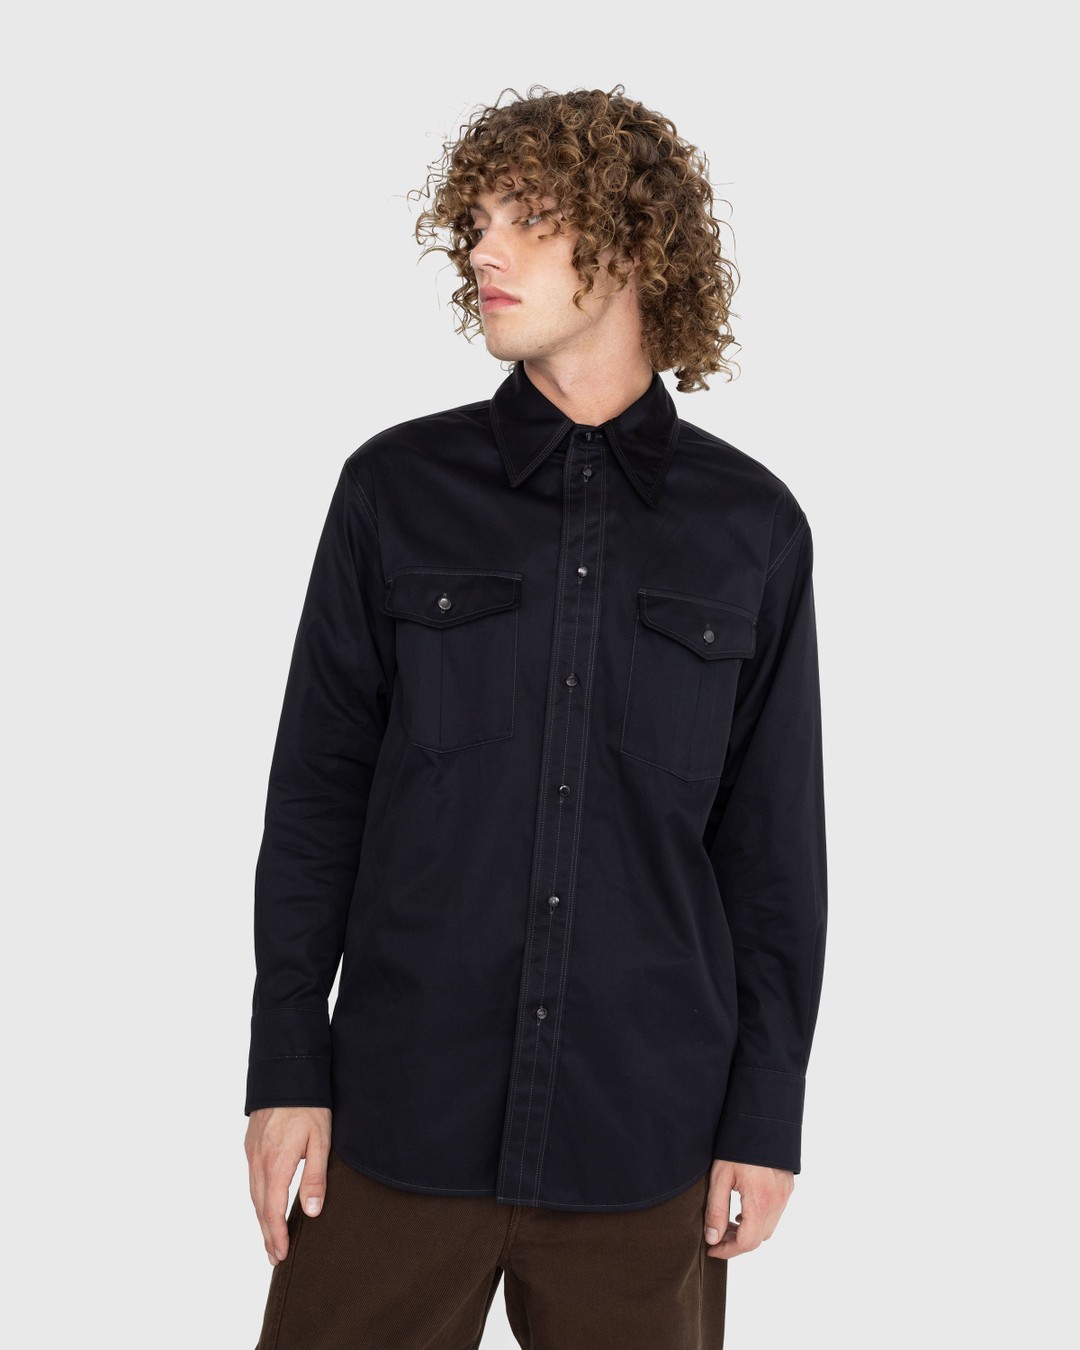 Lemaire – Relaxed Western Shirt Black | Highsnobiety Shop